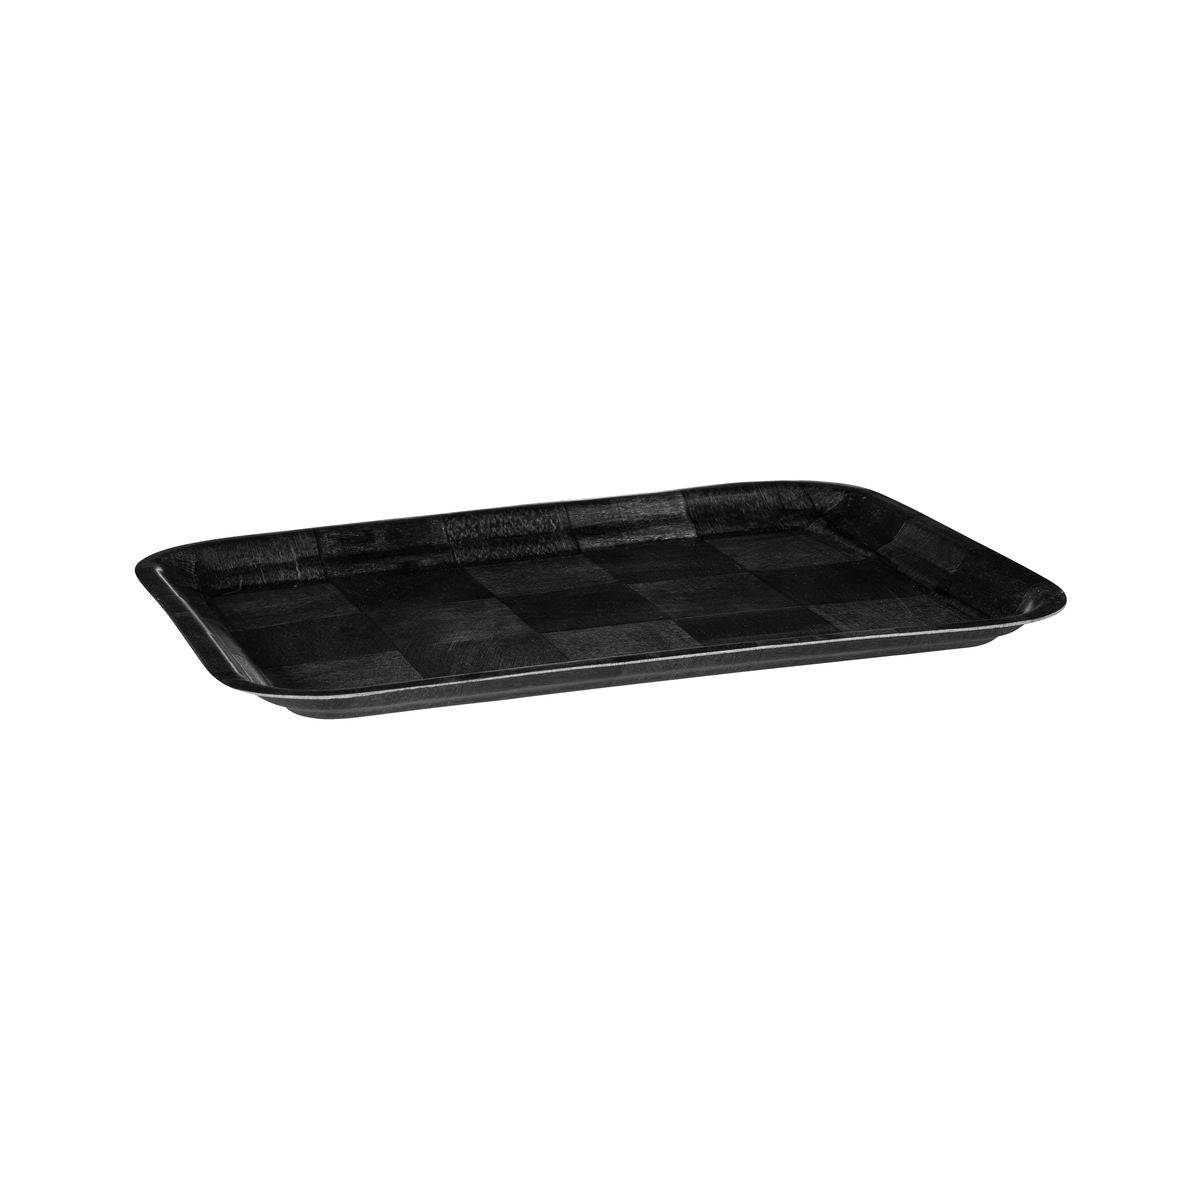 Rectangular Tray, 300 x 400mm - Black Woven Wood from Trenton. Sold in boxes of 12. Hospitality quality at wholesale price with The Flying Fork! 